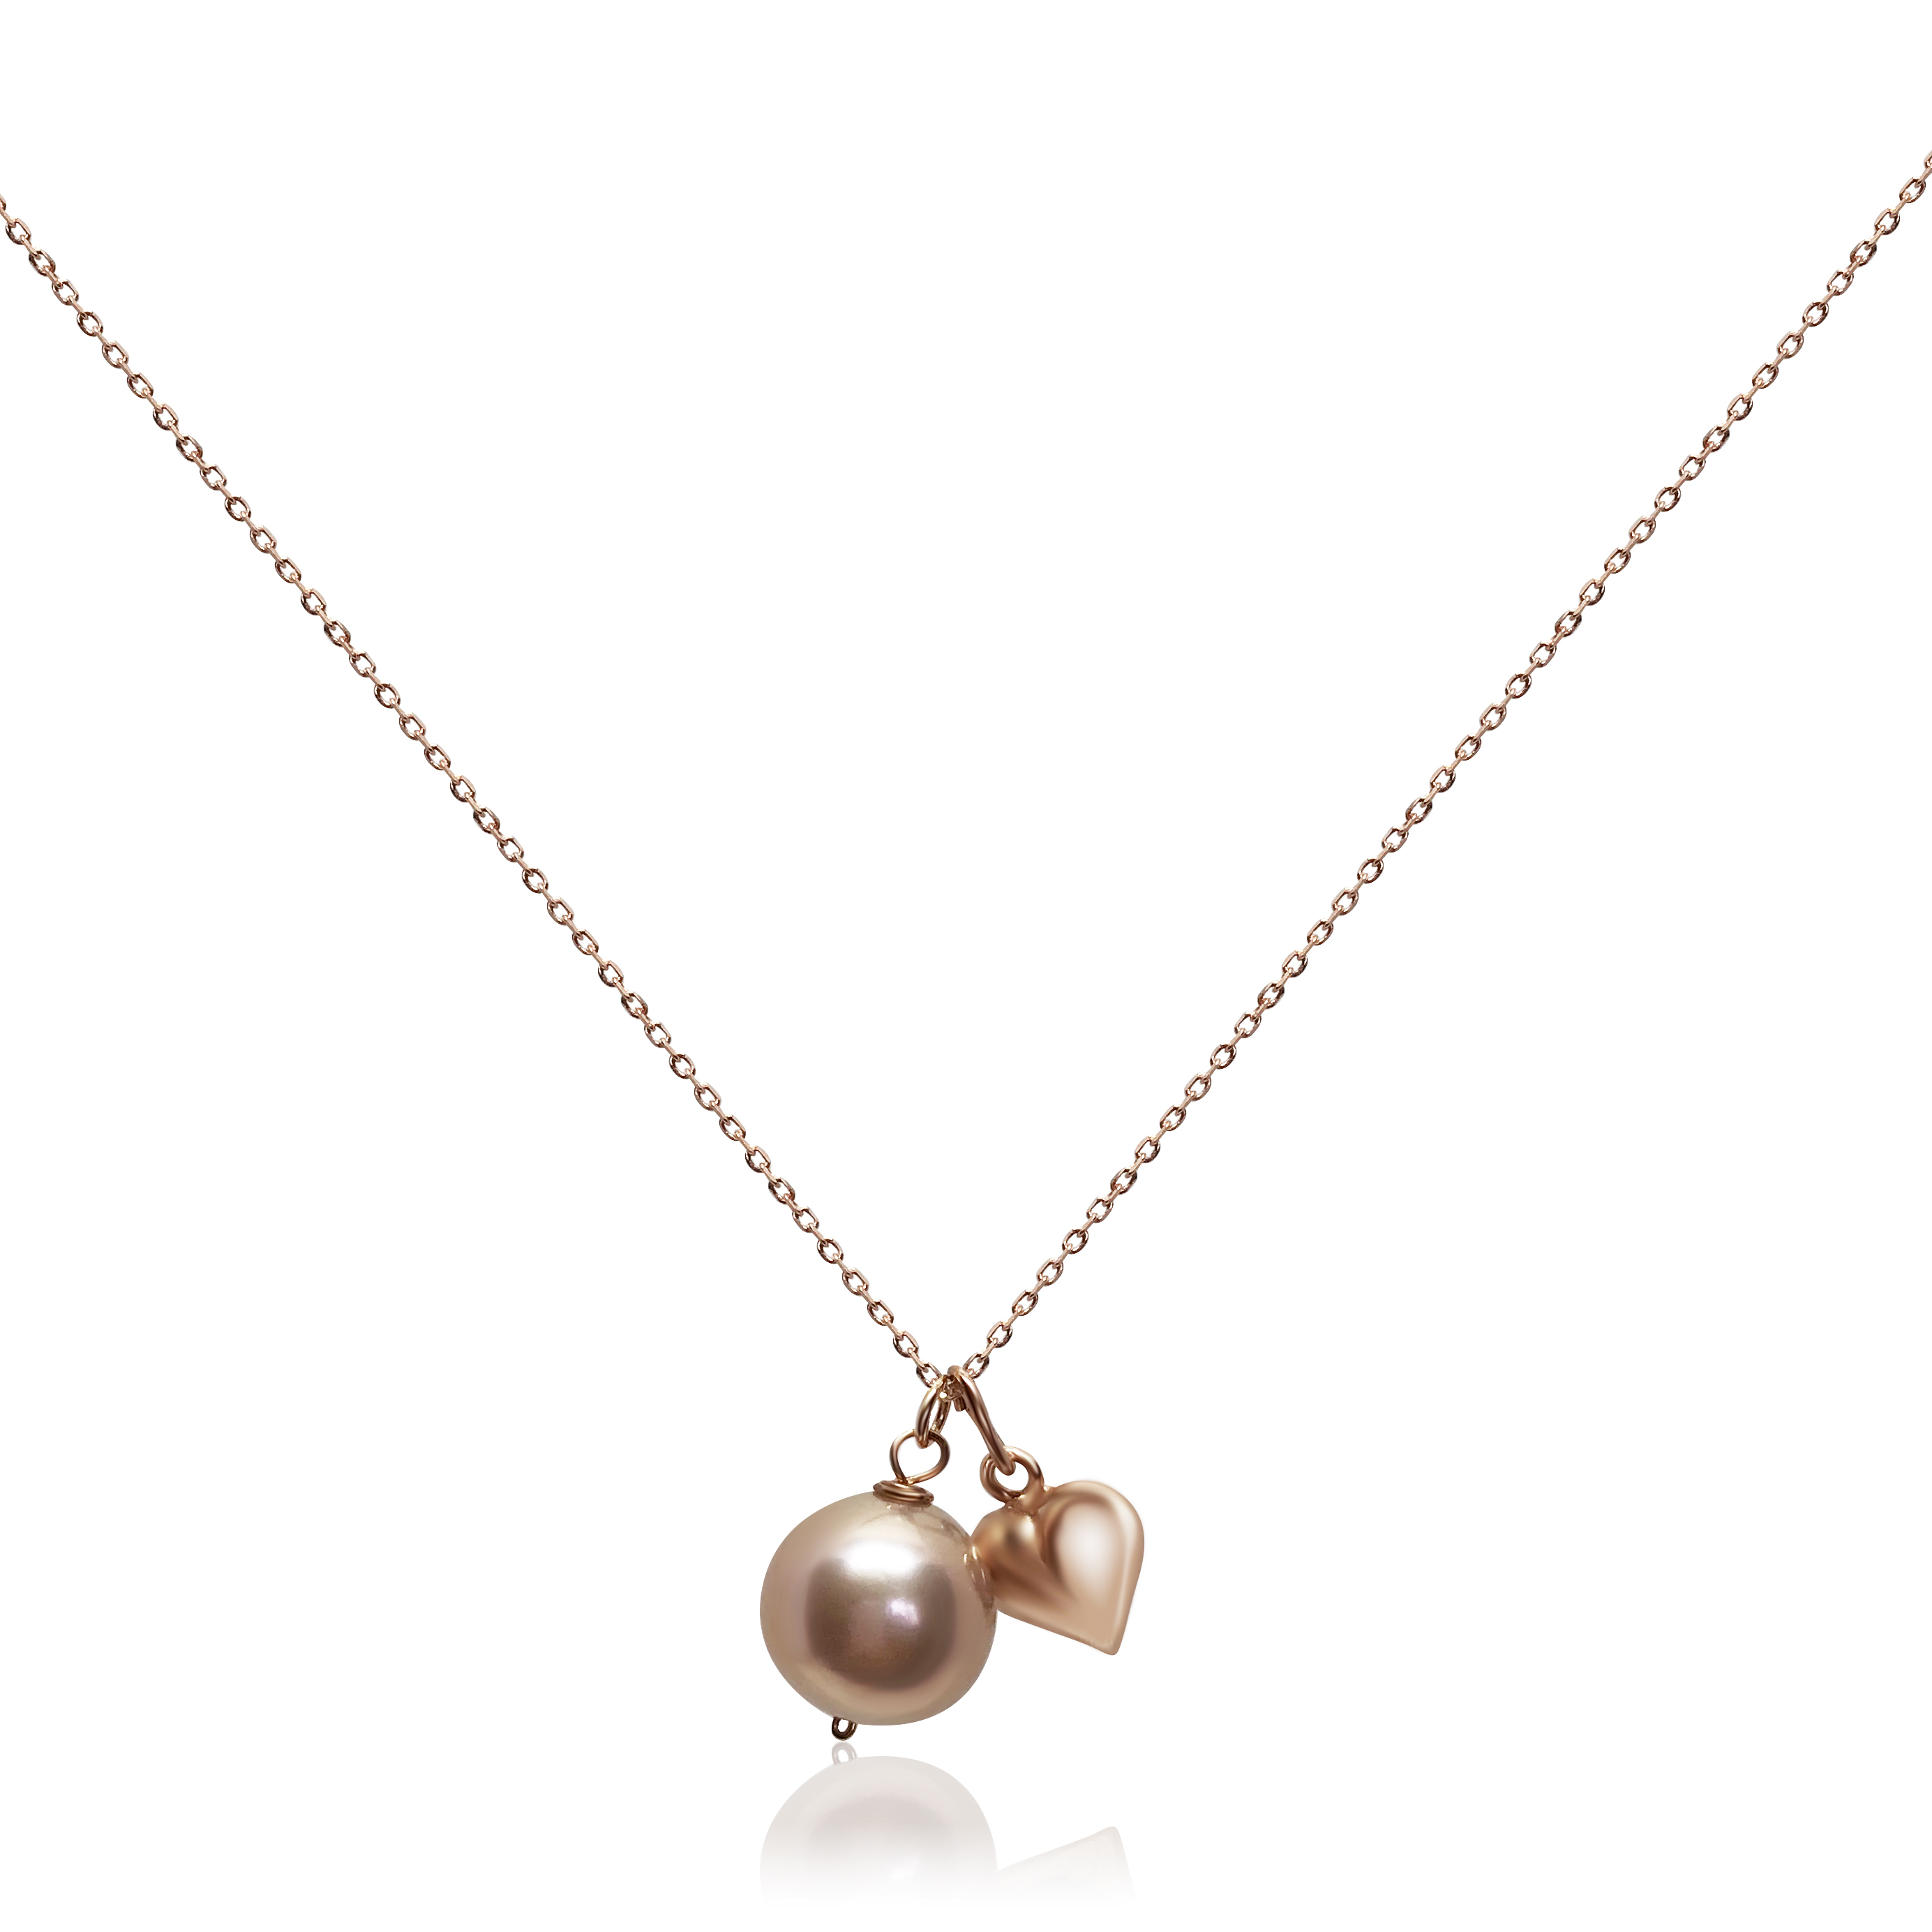 Lustrous Rose Pearl Pendant with Puff Heart Charm, Rose Gold